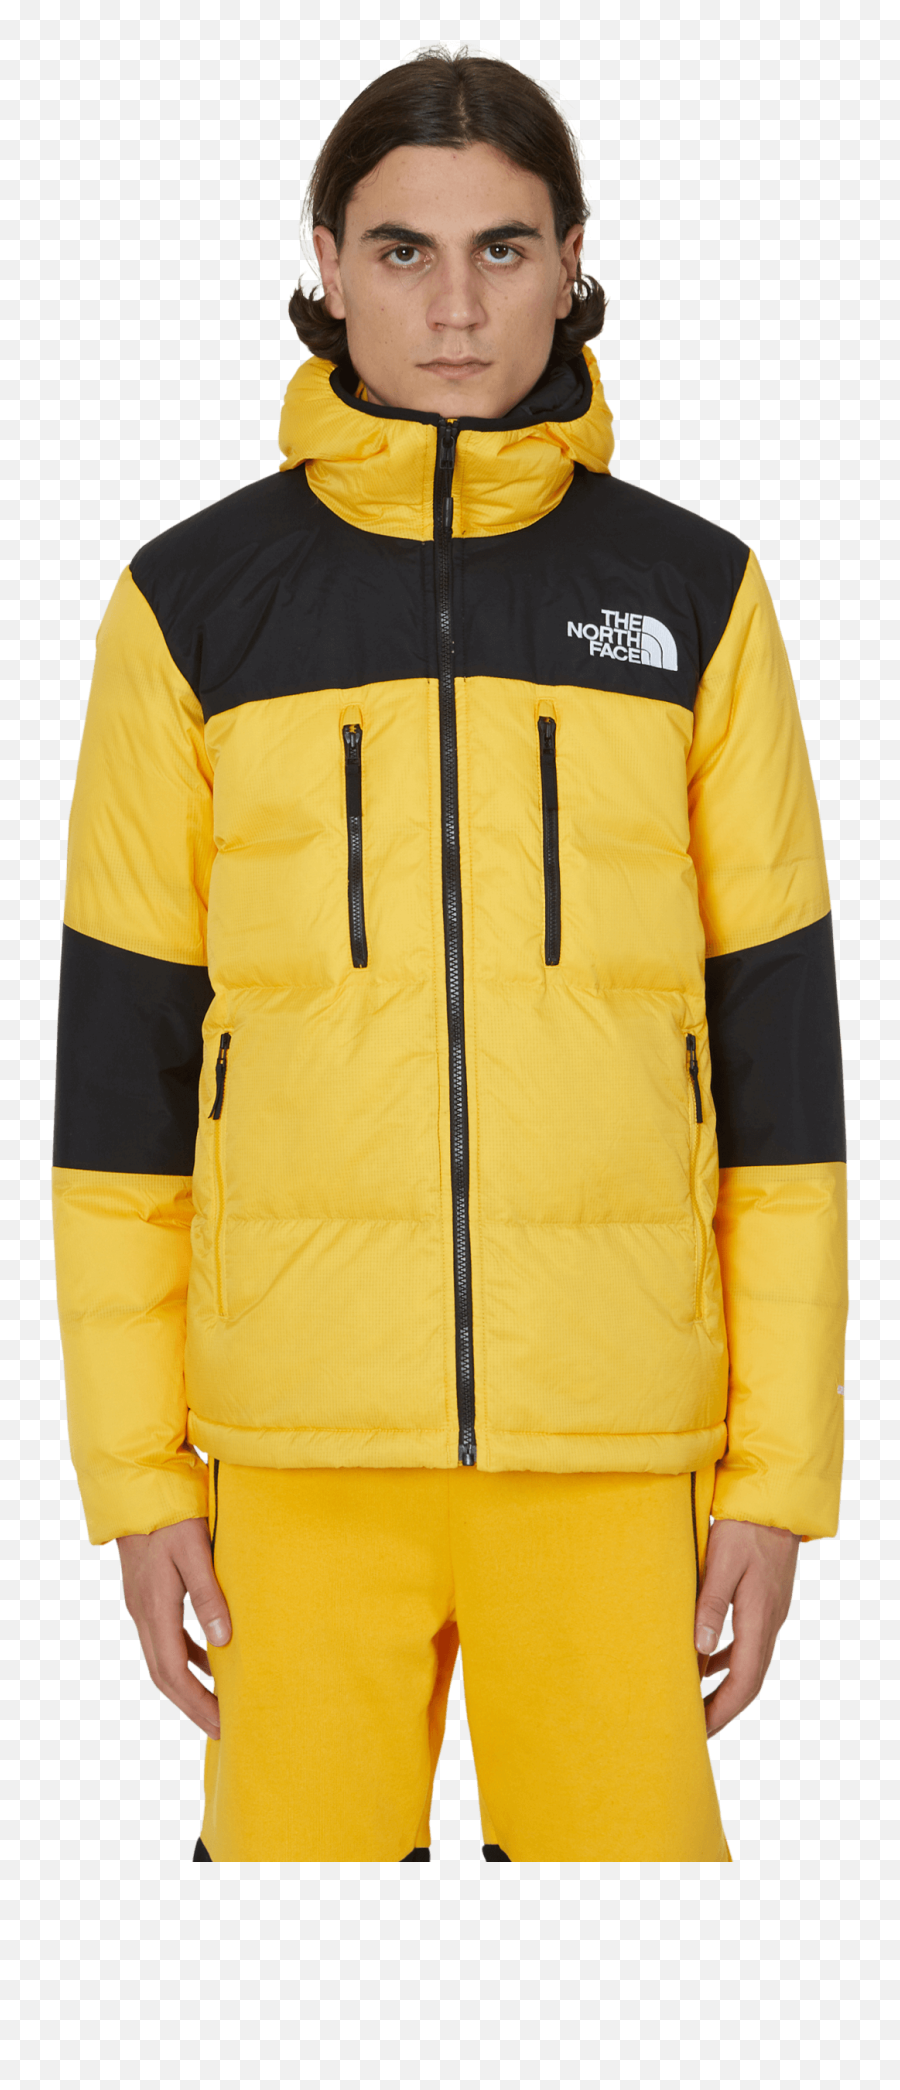 The North Face Himalayan Zip Hooded - North Face Himalayan Zip Emoji,North Face Logo